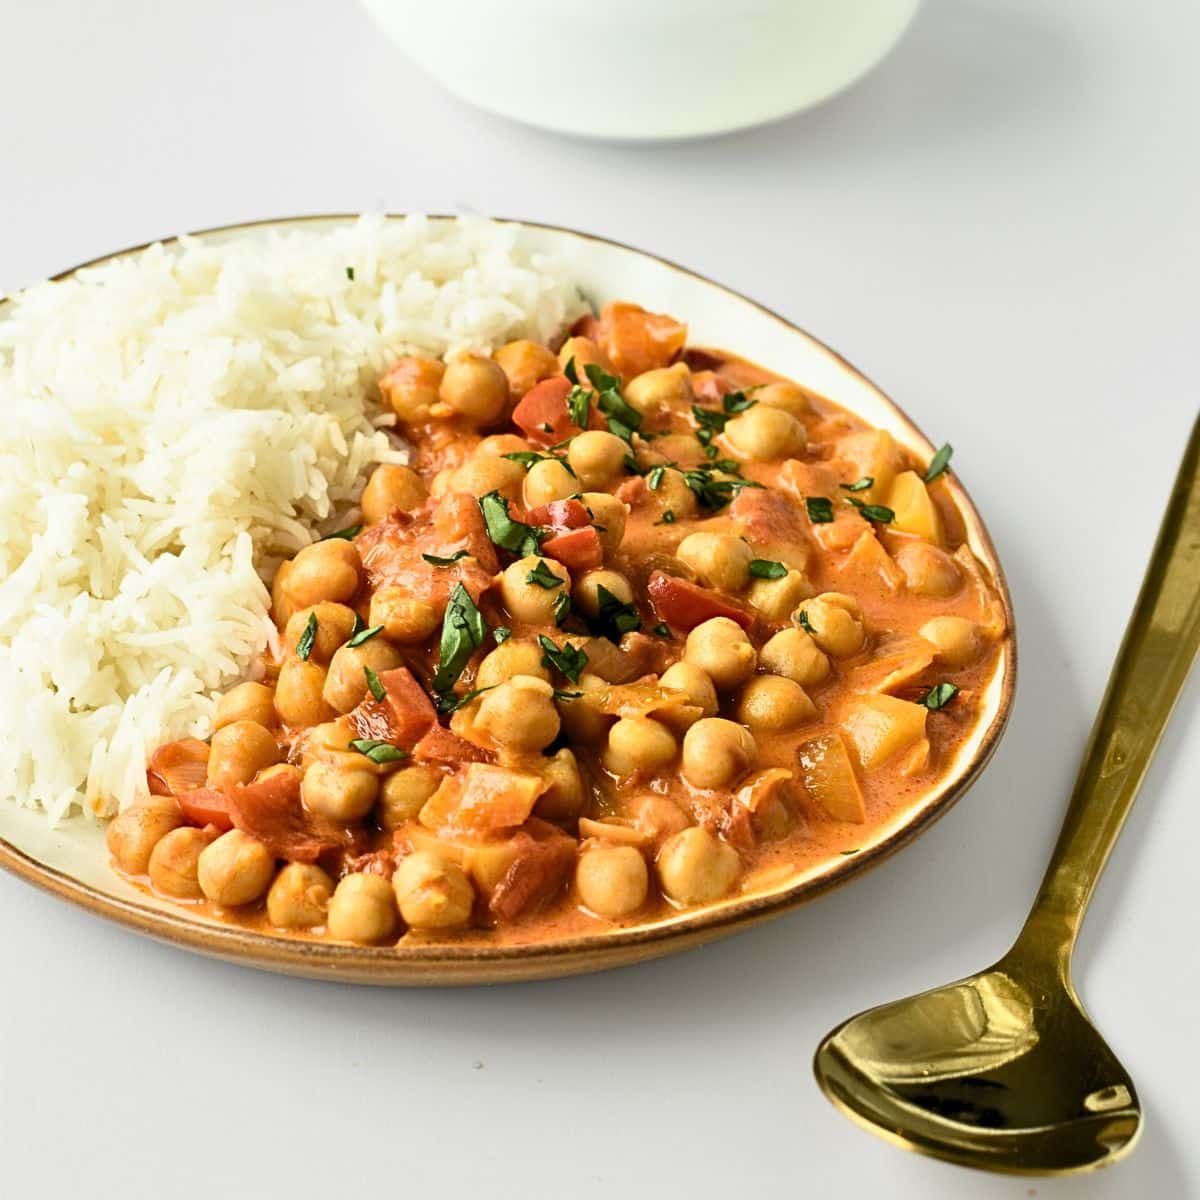 Vegan Chickpea Curry on a plate with rice.